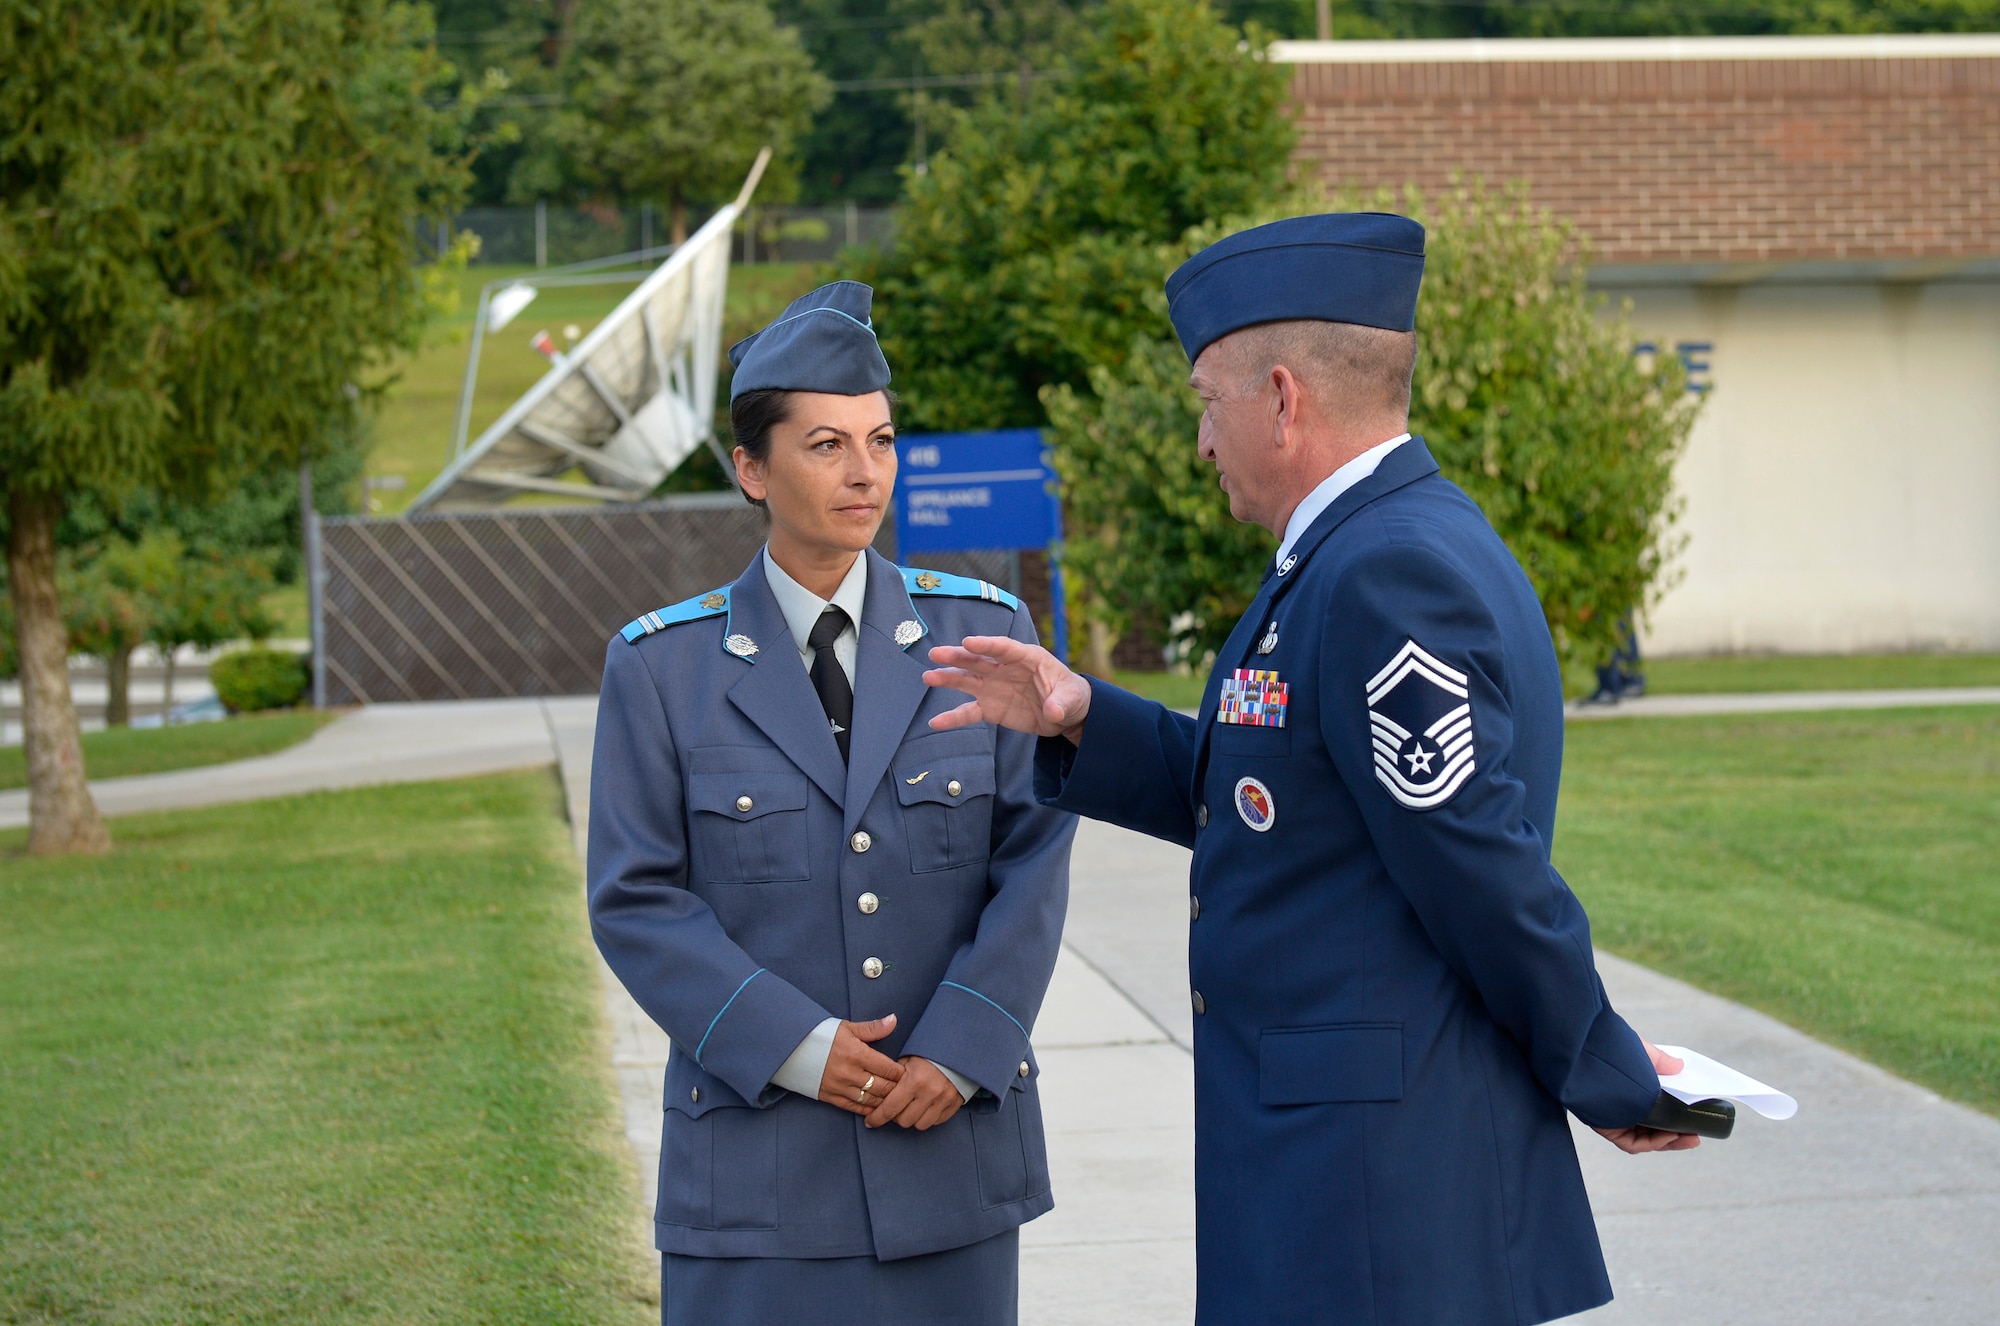 MCGHEE TYSON AIR NATIONAL GUARD BASE, Tenn. - Sergeant Yordanka S. Petrova-Angelova with the Bulgarian air force talks with U.S. Air Force Senior Master Sgt. Andrew Traugot, director of education, Satellite EPME, here August 15, 2013, on the campus of the I.G. Brown Training and Education Center. Petrova-Angelova graduated from the U.S. Air Force Noncommissioned Officer Academy instructed by the Paul H. Lankford Enlisted PME Center.   She and Bulgarian Corporal Stoyko V. Stoykov, who attended Airman Leadership School at around the same time, completed the leadership education this summer as part of relations built through the Tennessee National Guard State Partnership Program. (U.S. Air National Guard photo by Master Sgt. Kurt Skoglund/Released)